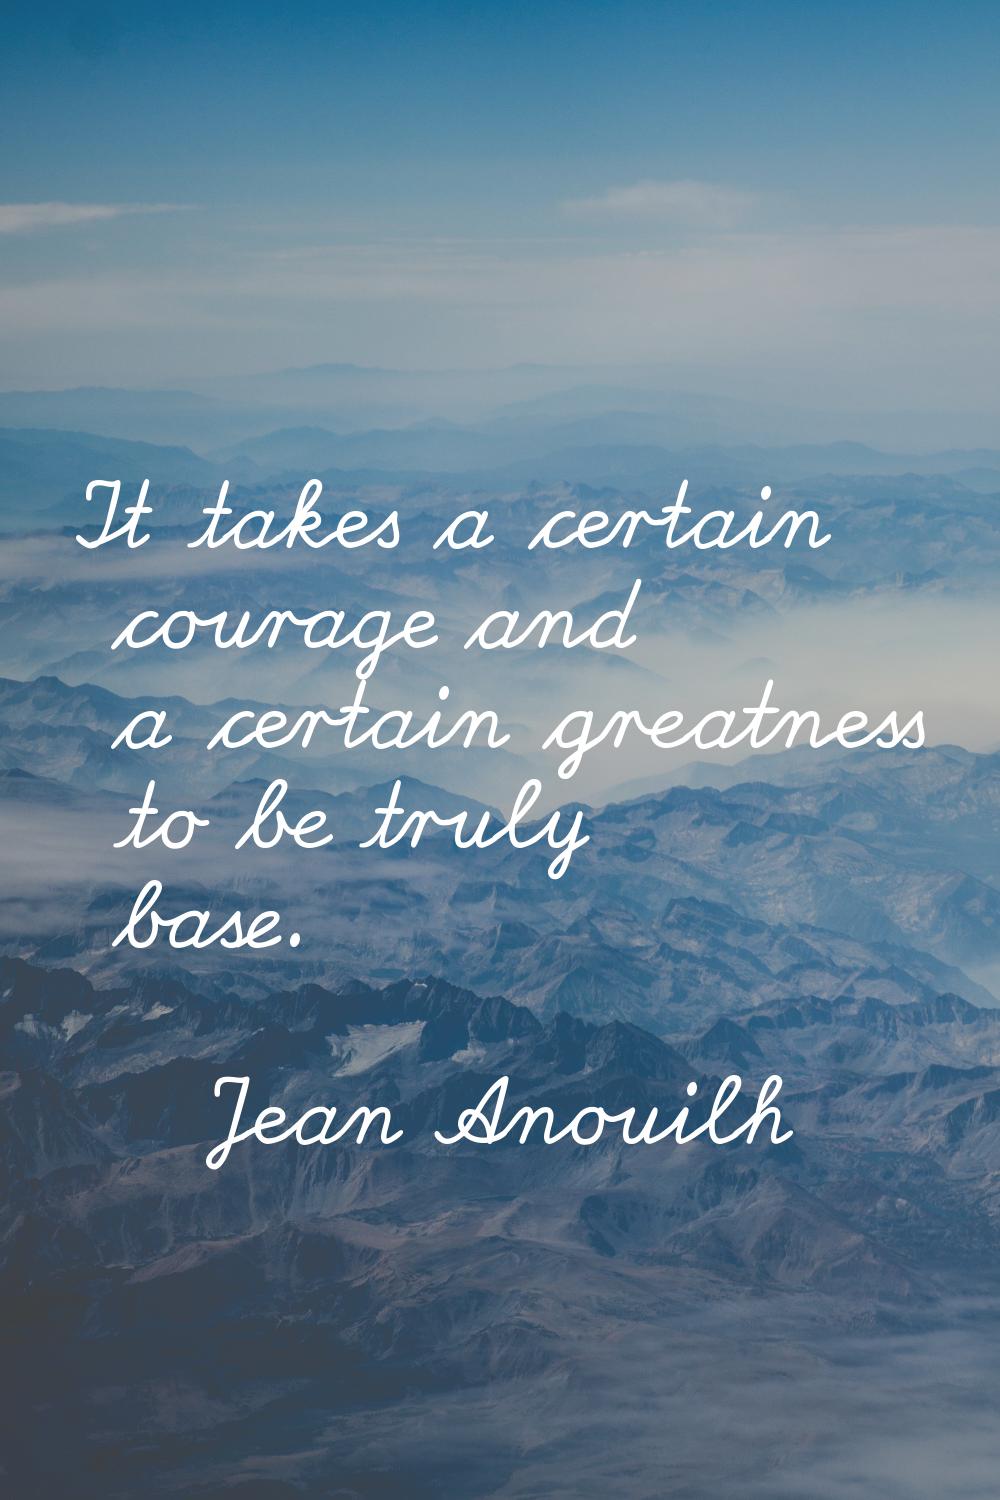 It takes a certain courage and a certain greatness to be truly base.